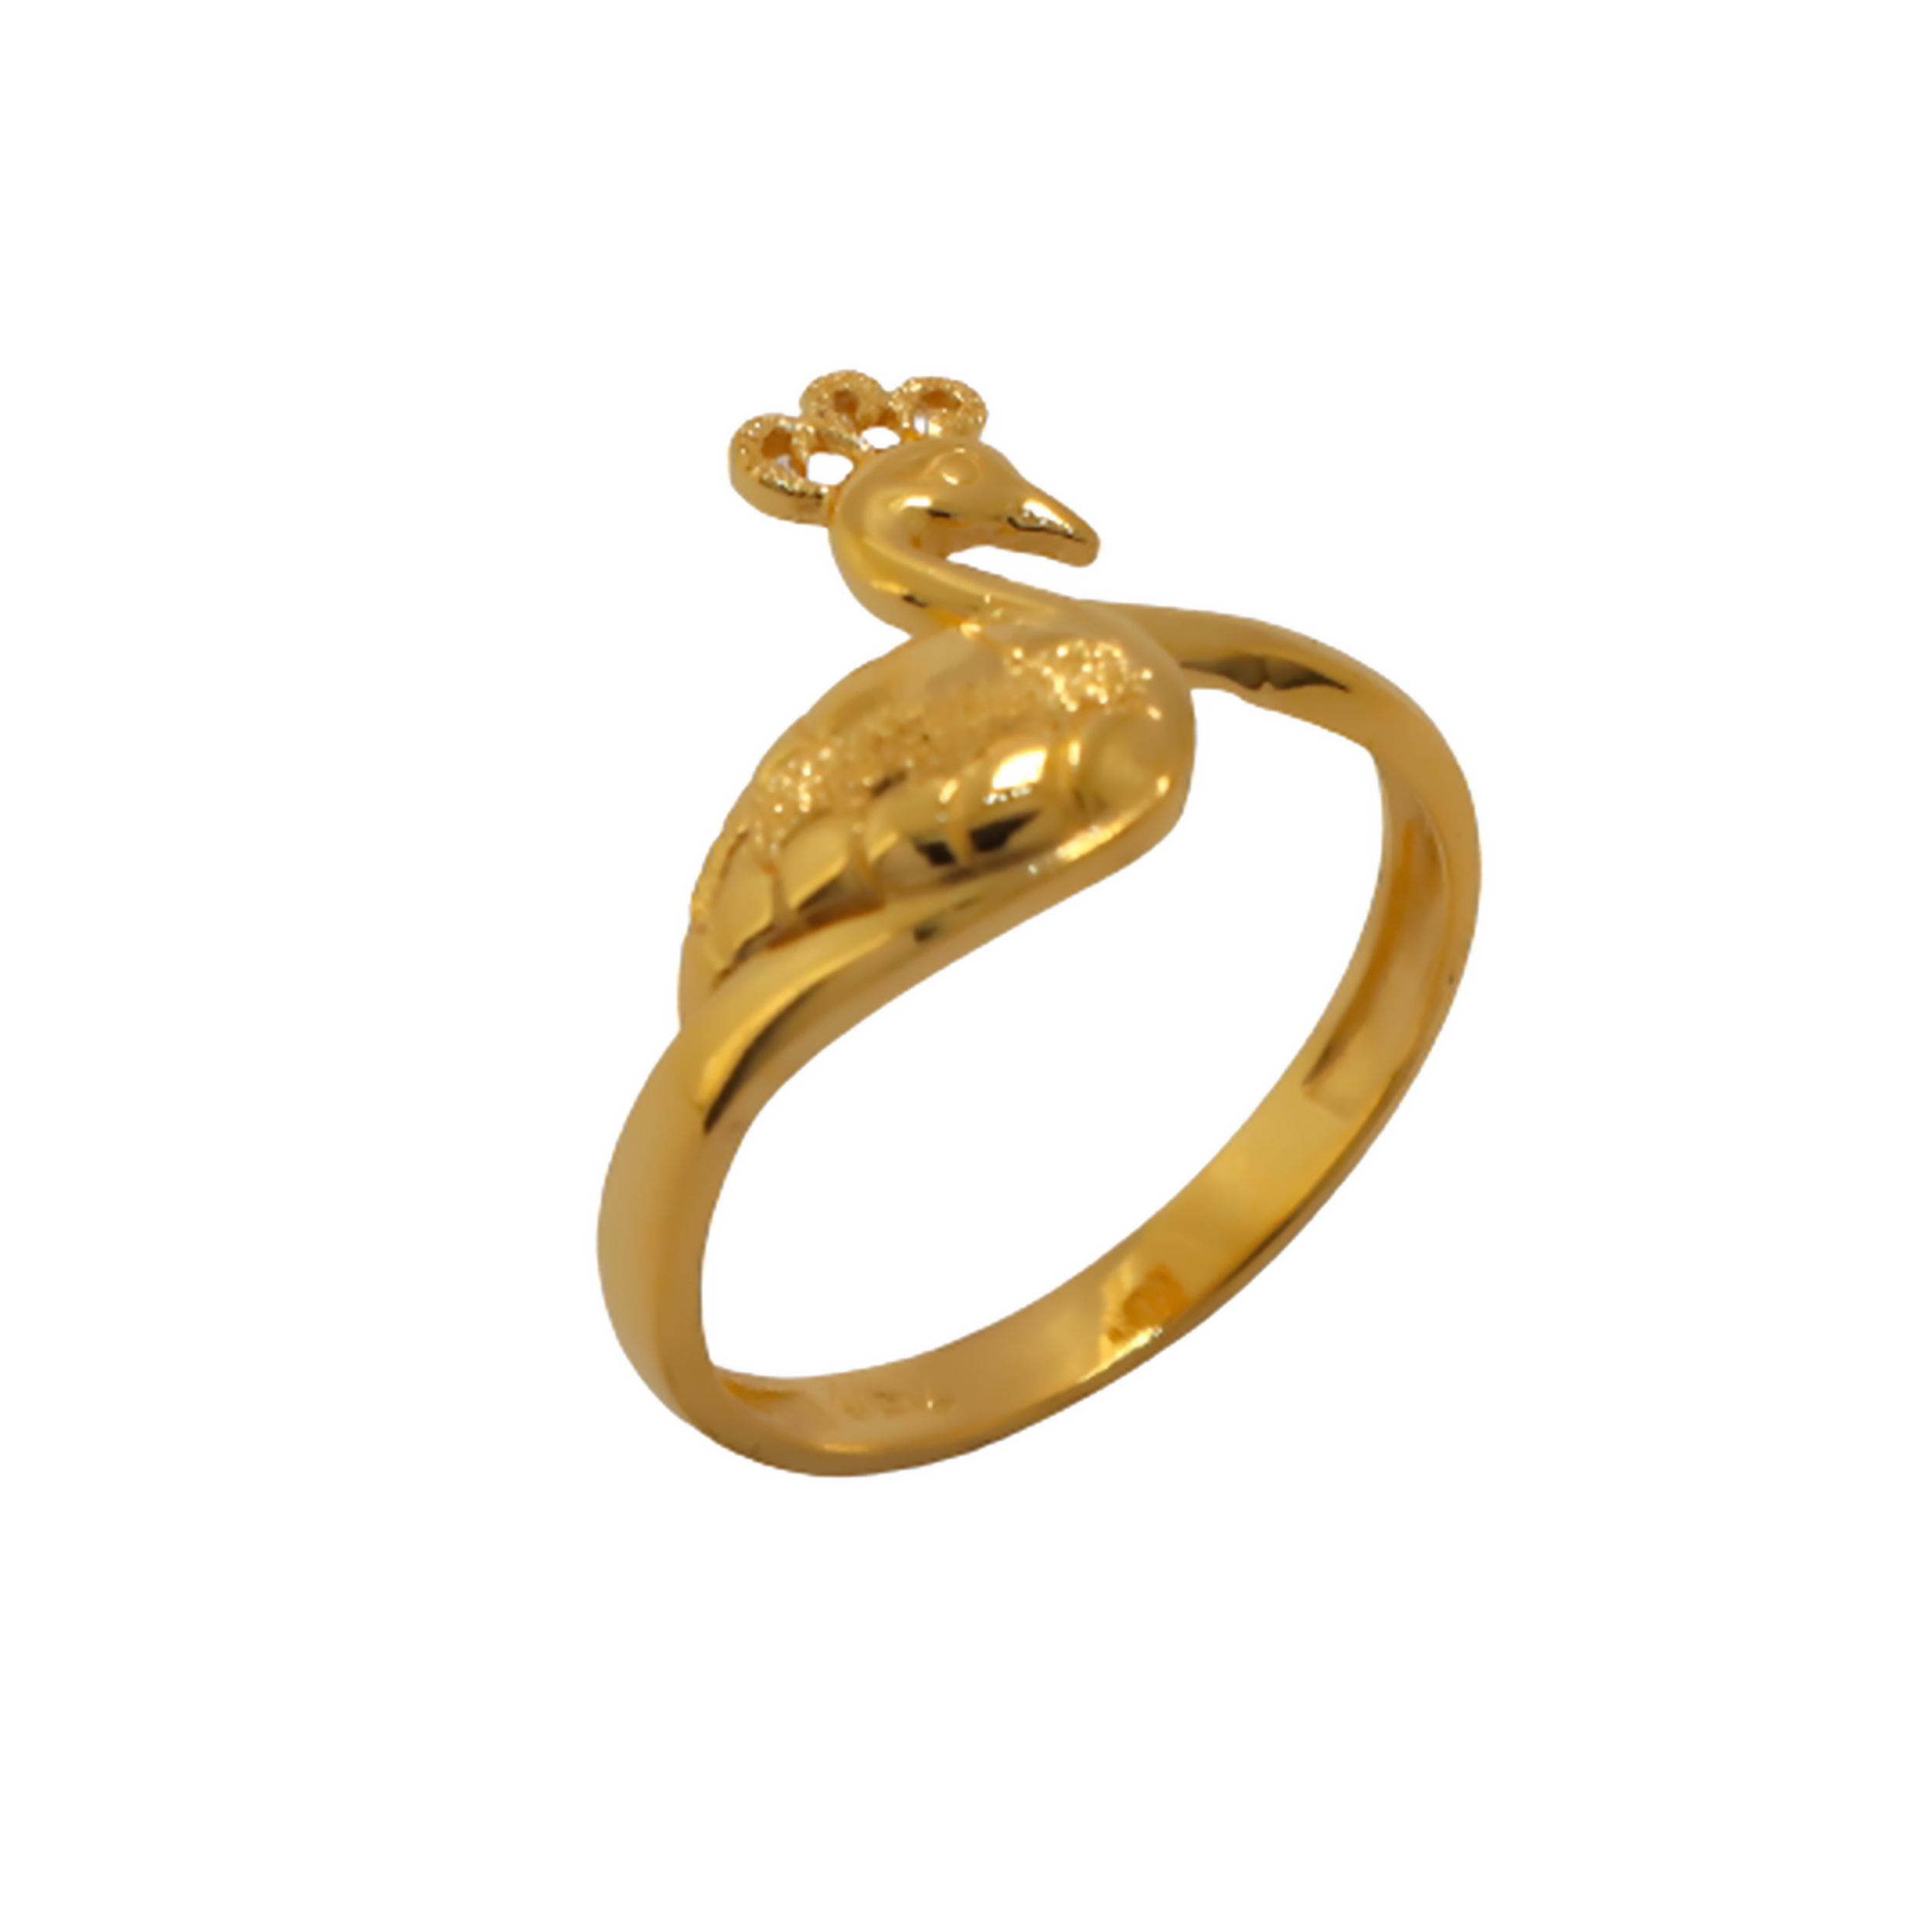 Buy Malabar Gold and Diamonds 22k Gold Peacock Ring for Women Online At  Best Price @ Tata CLiQ